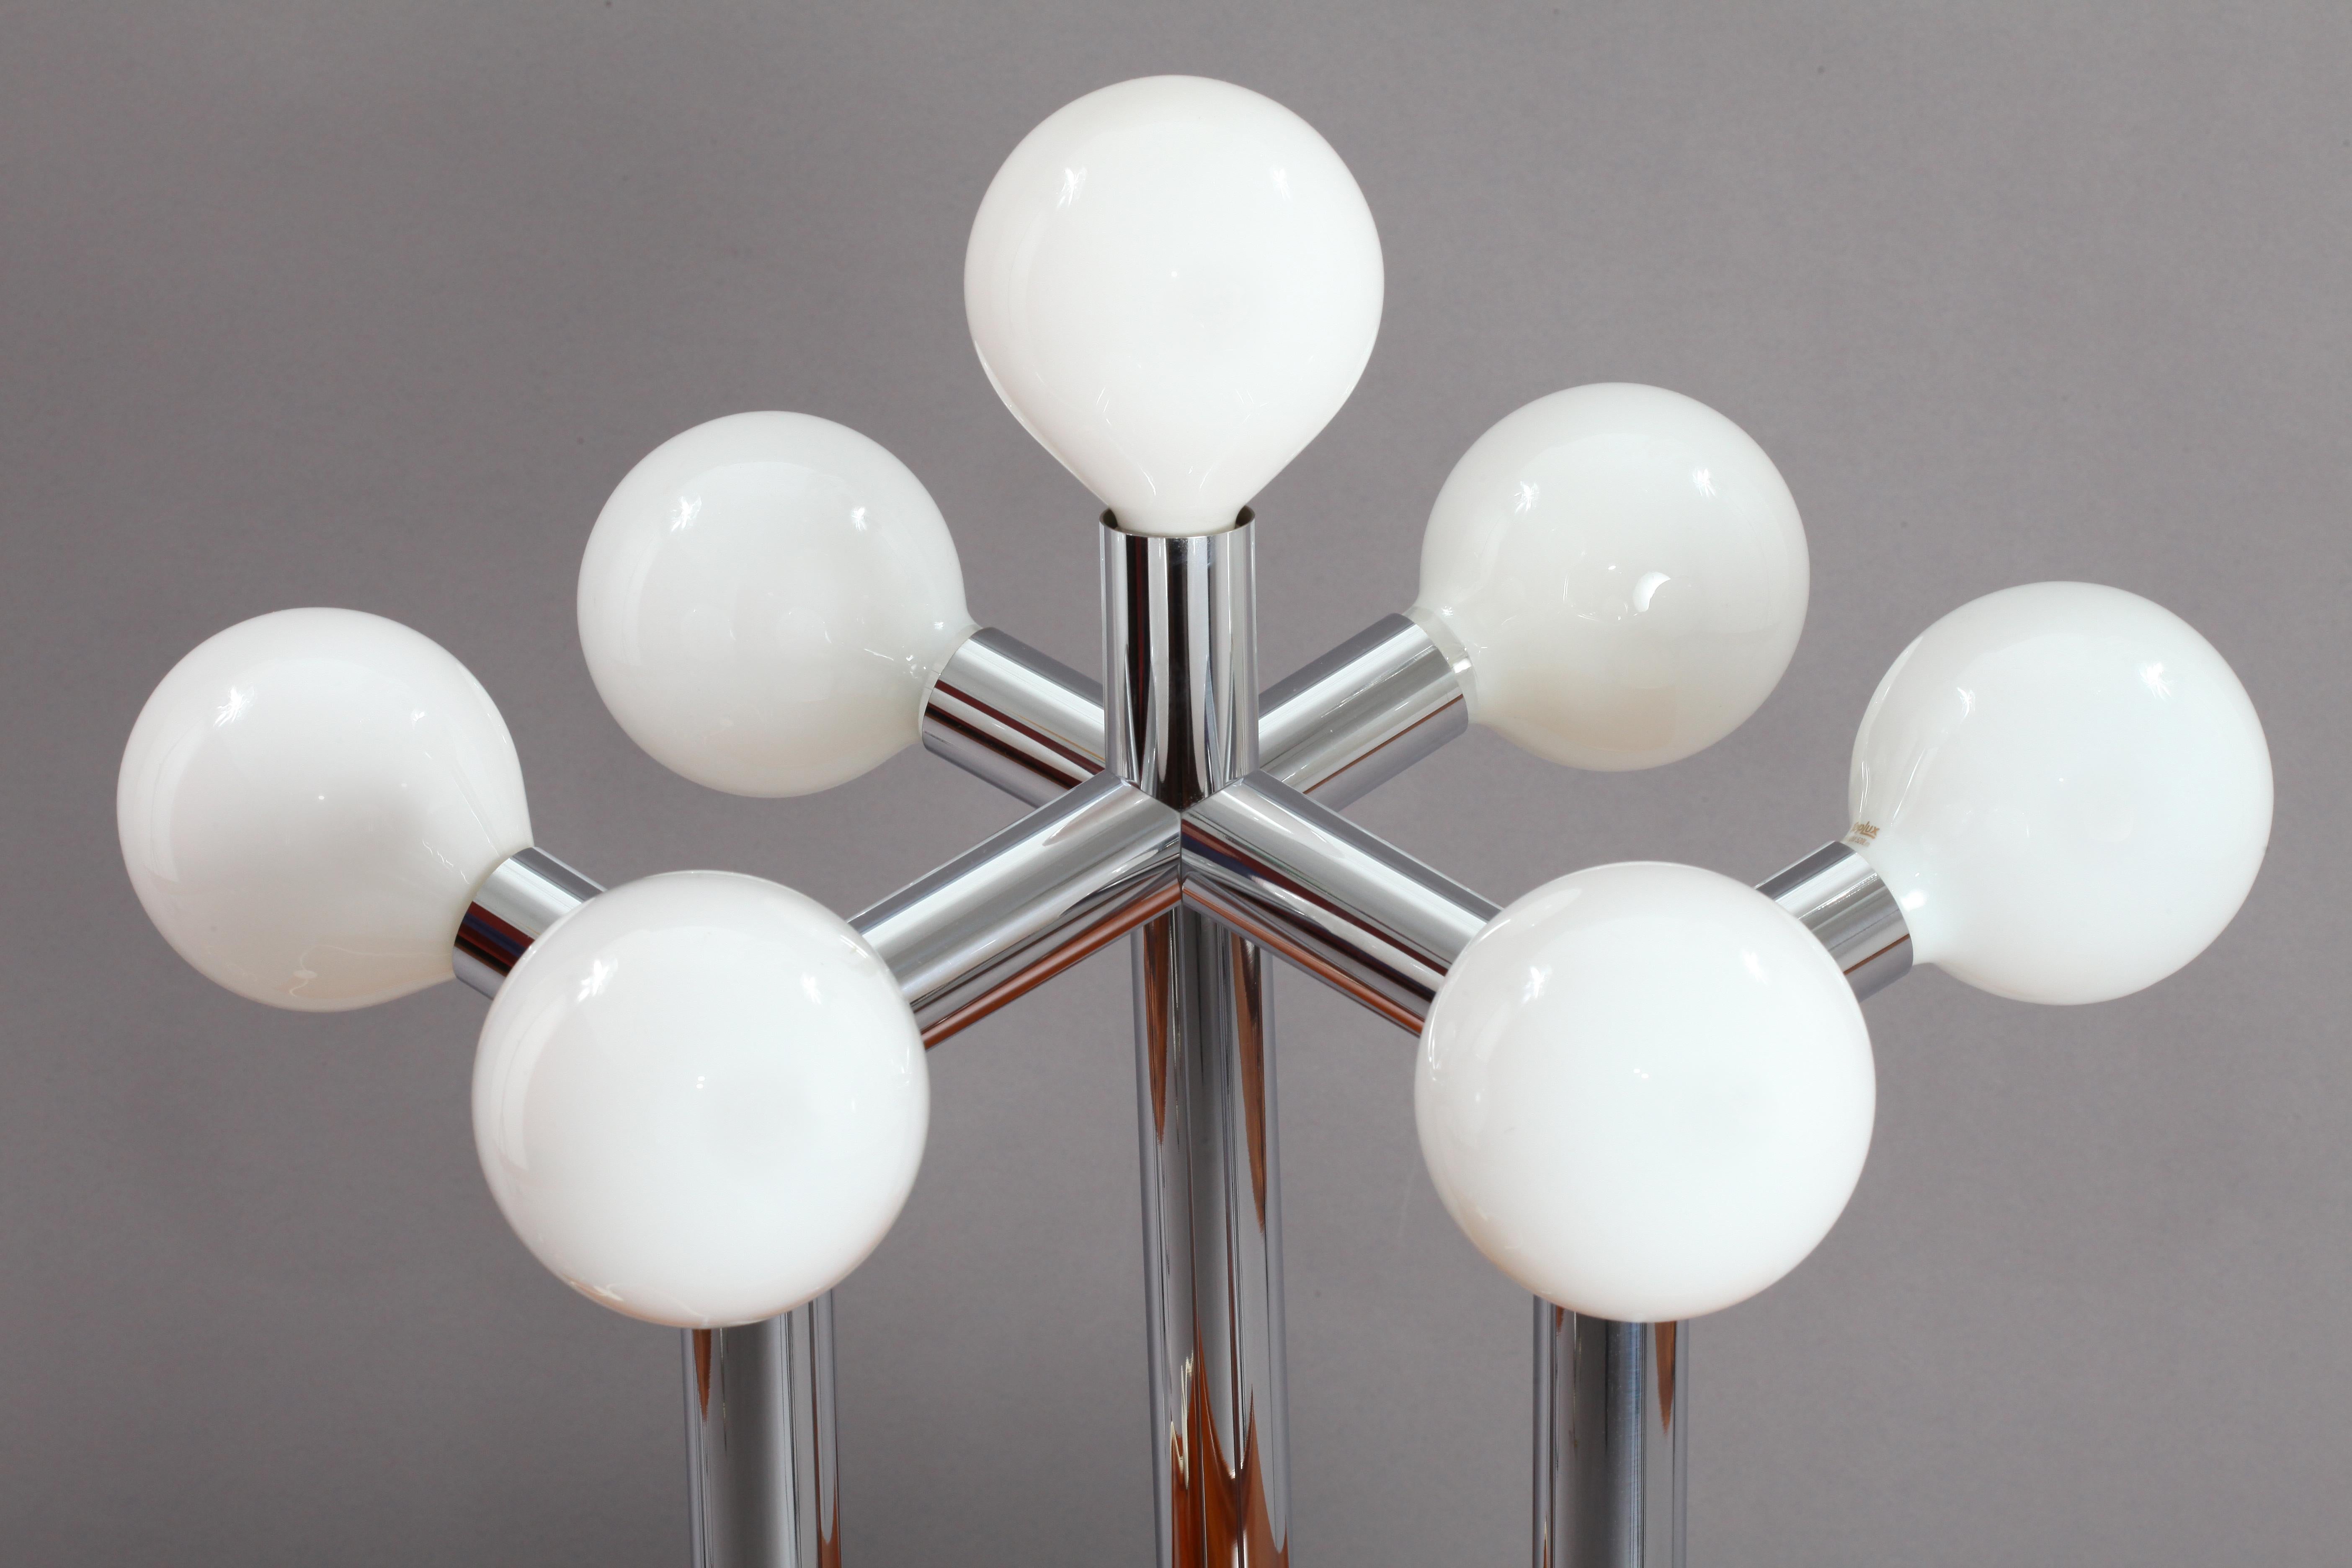 Late 20th Century Space Age Atomium Table Lamp Designed by J. T. Kalmar, Vienna, 1970